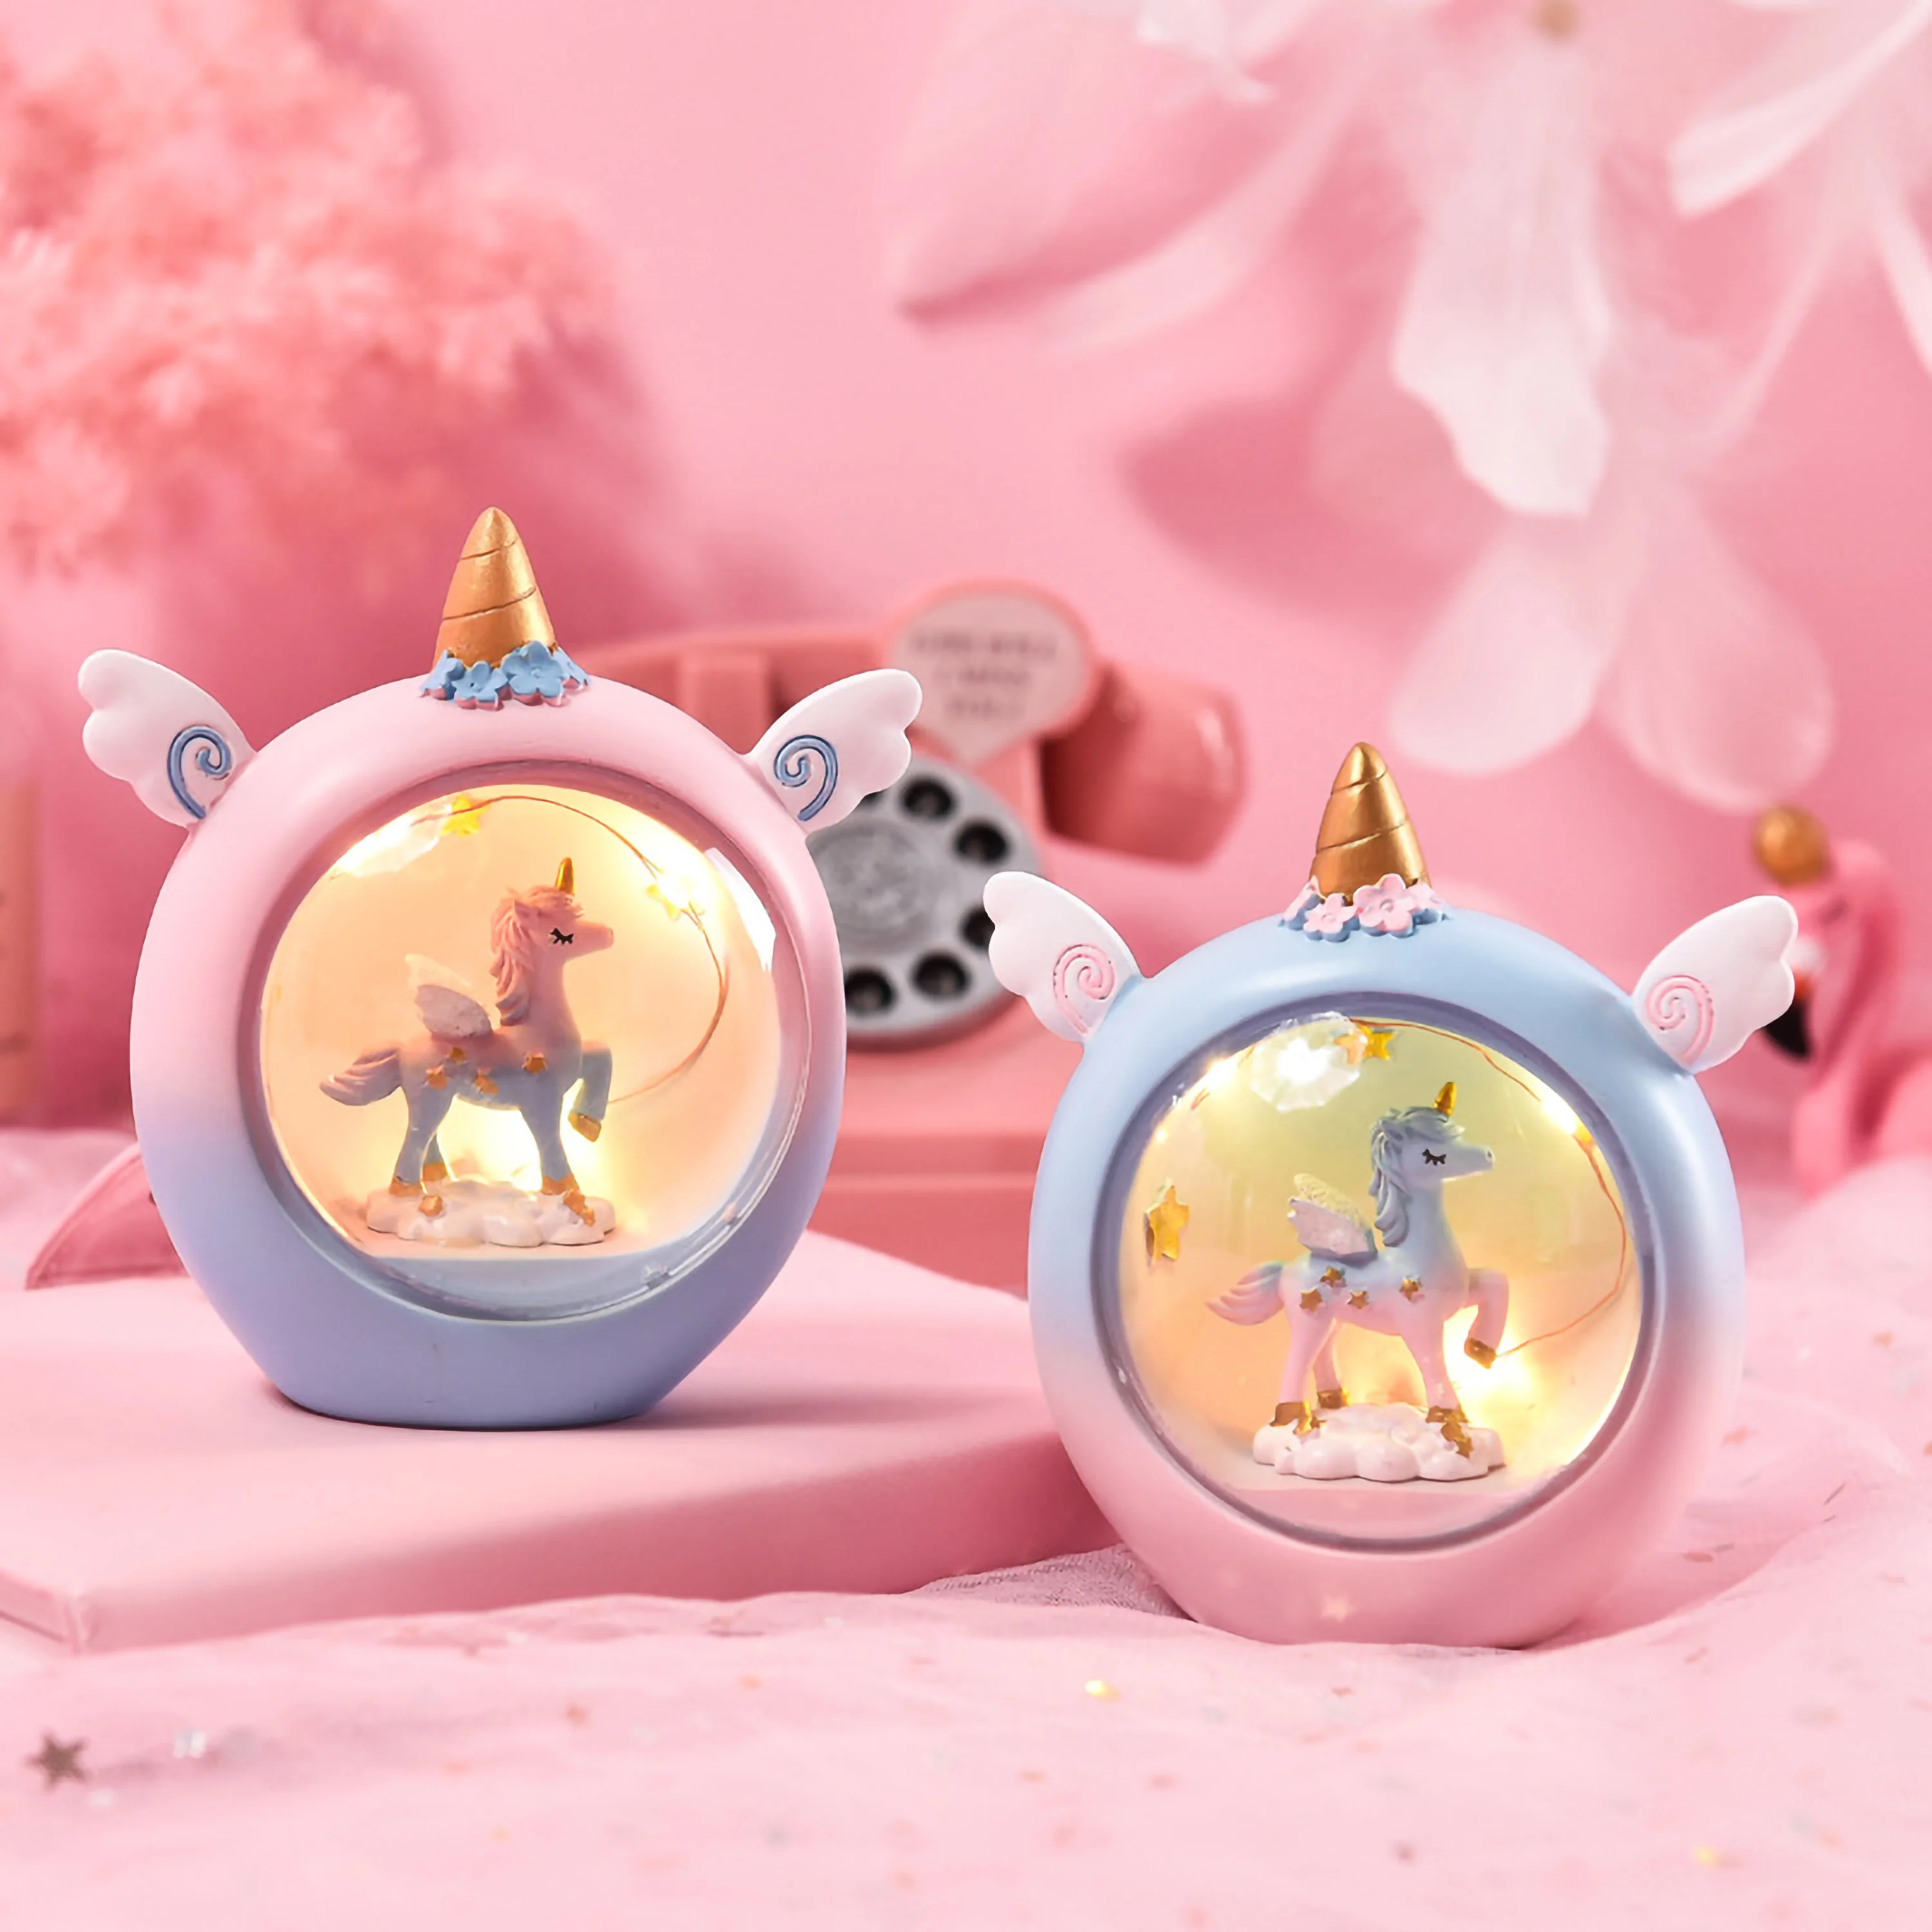 Cute Unicorn Ornament Lovely Young Girls Birthday Gift Children's Room Decoration Kid's House Decor Pink Ornamentation